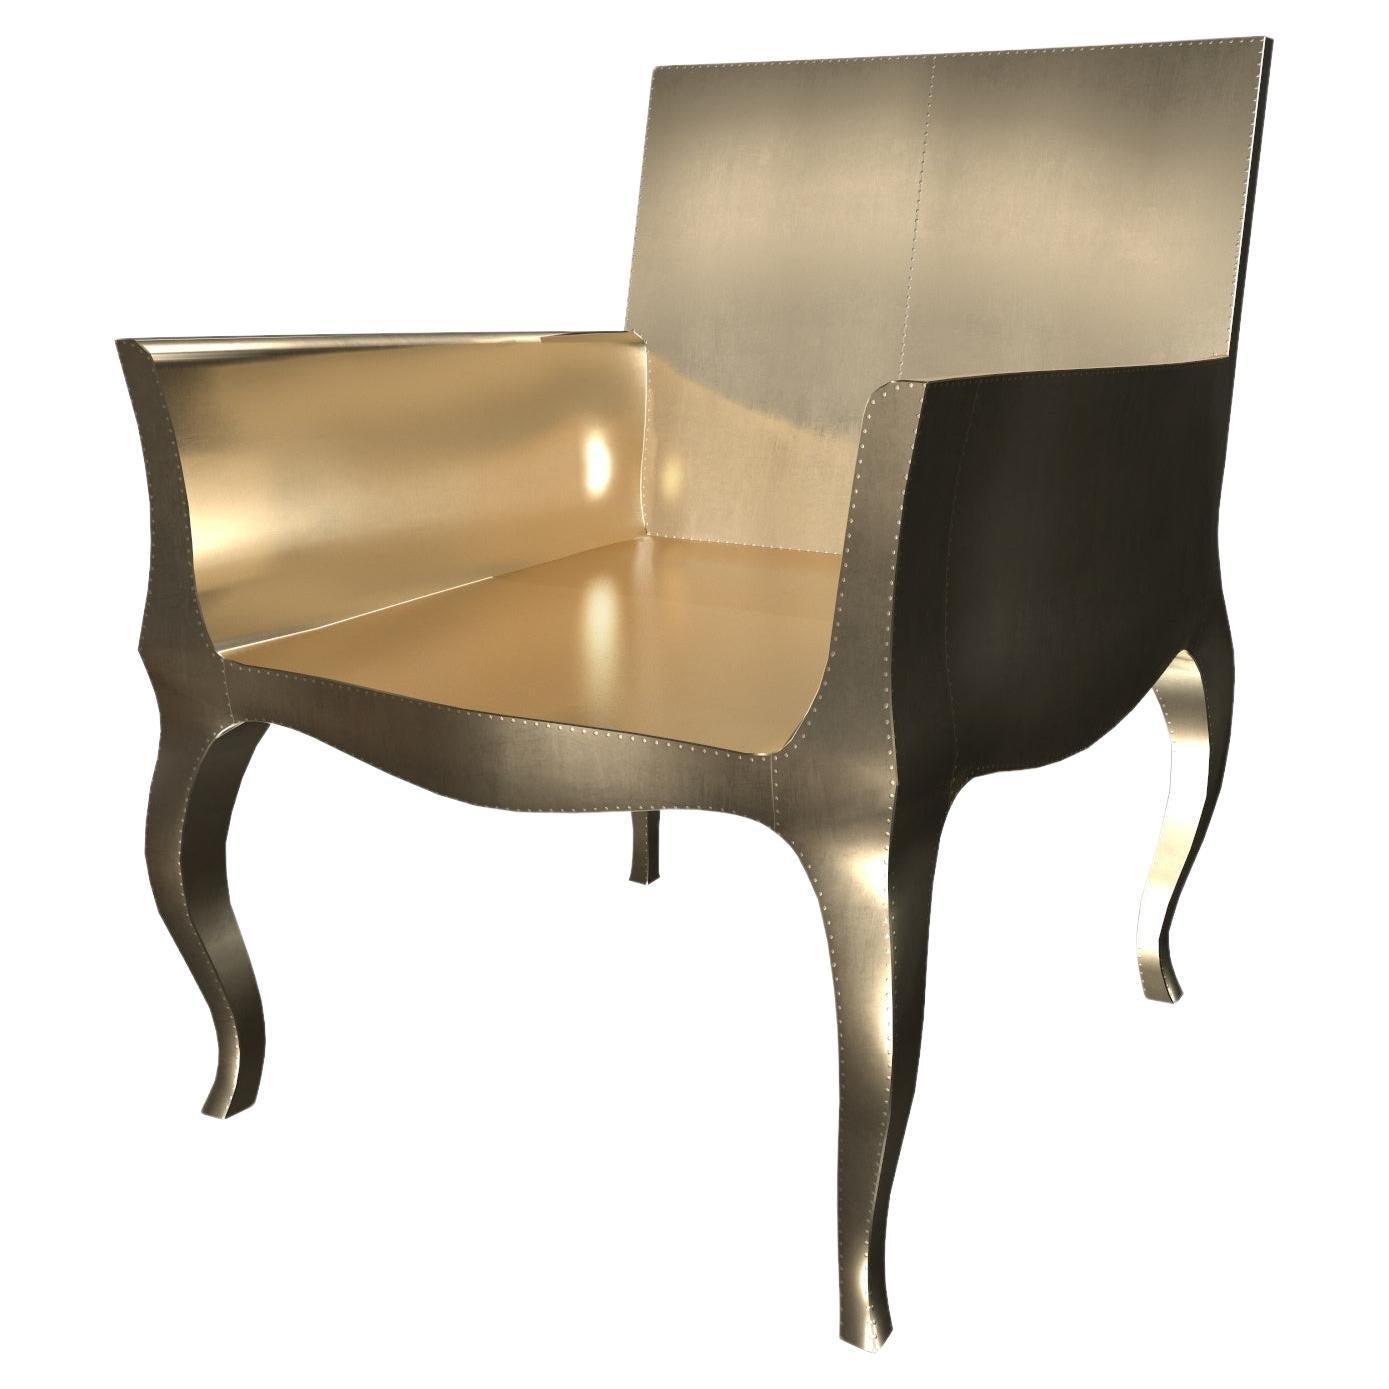 Art Deco Club Chairs in Smooth Brass by Paul Mathieu for S. Odegard